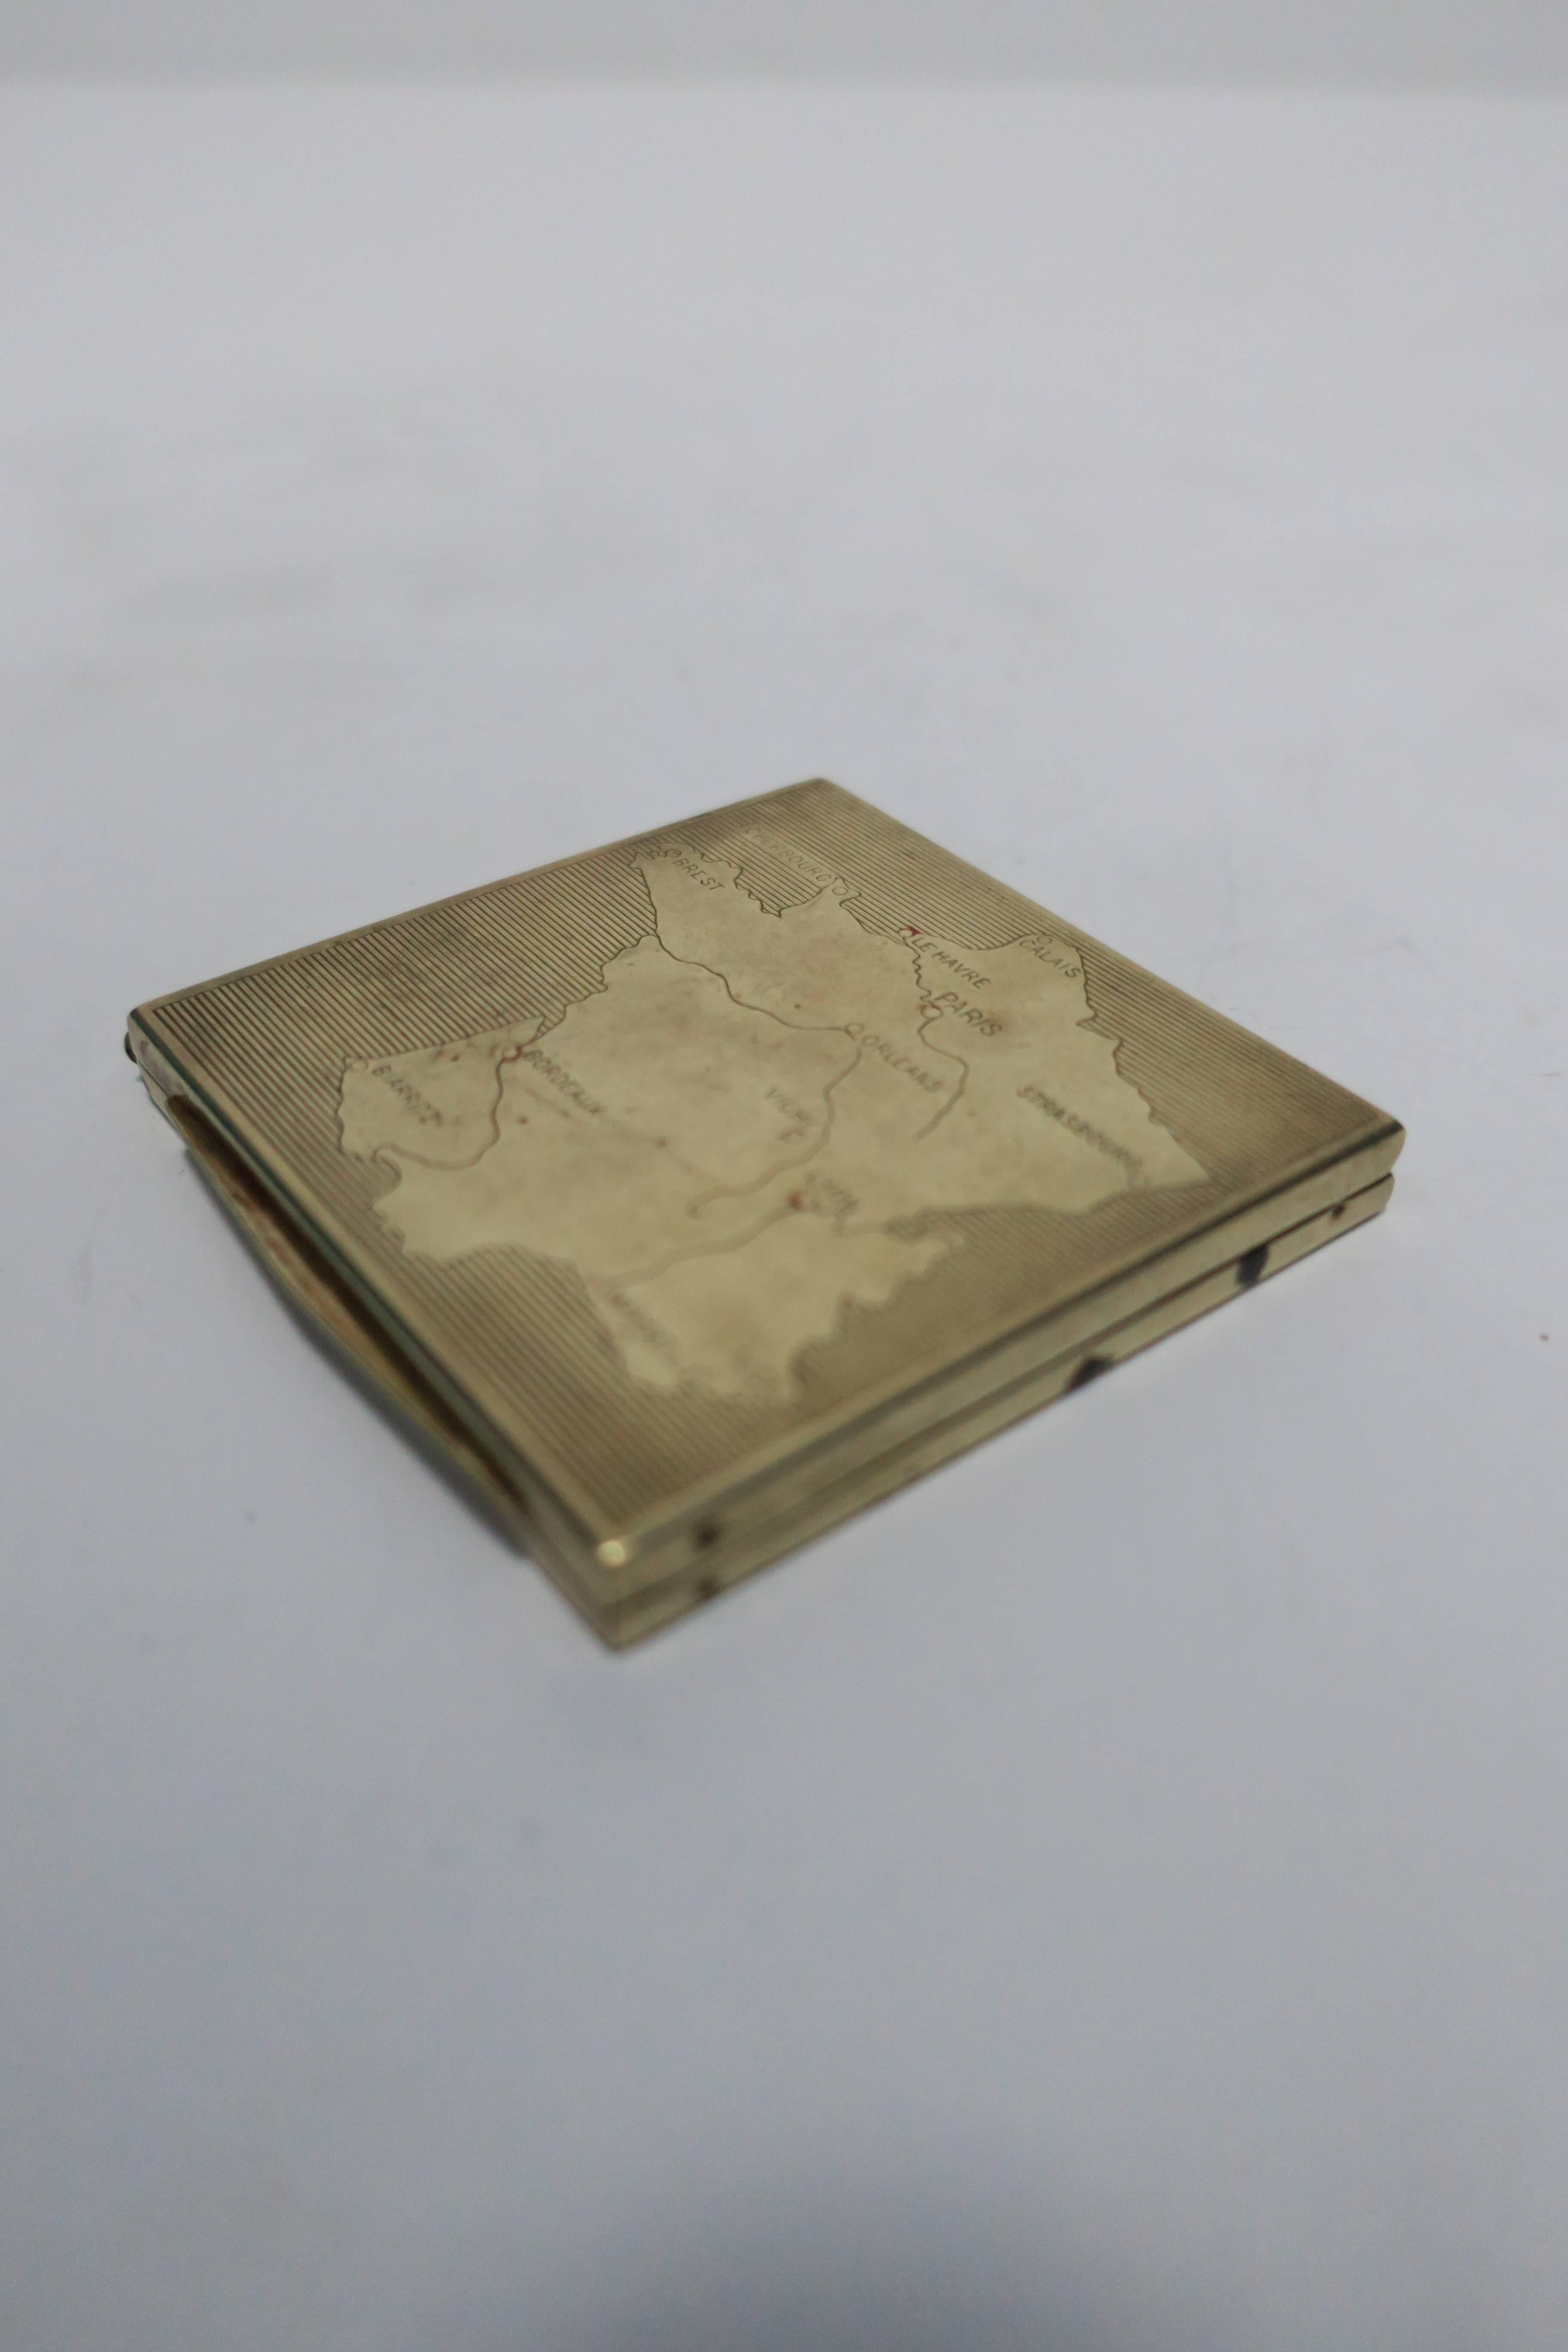 A vintage brass makeup mirror compact case with map of France embossed on front. Case measures: 2 3/8